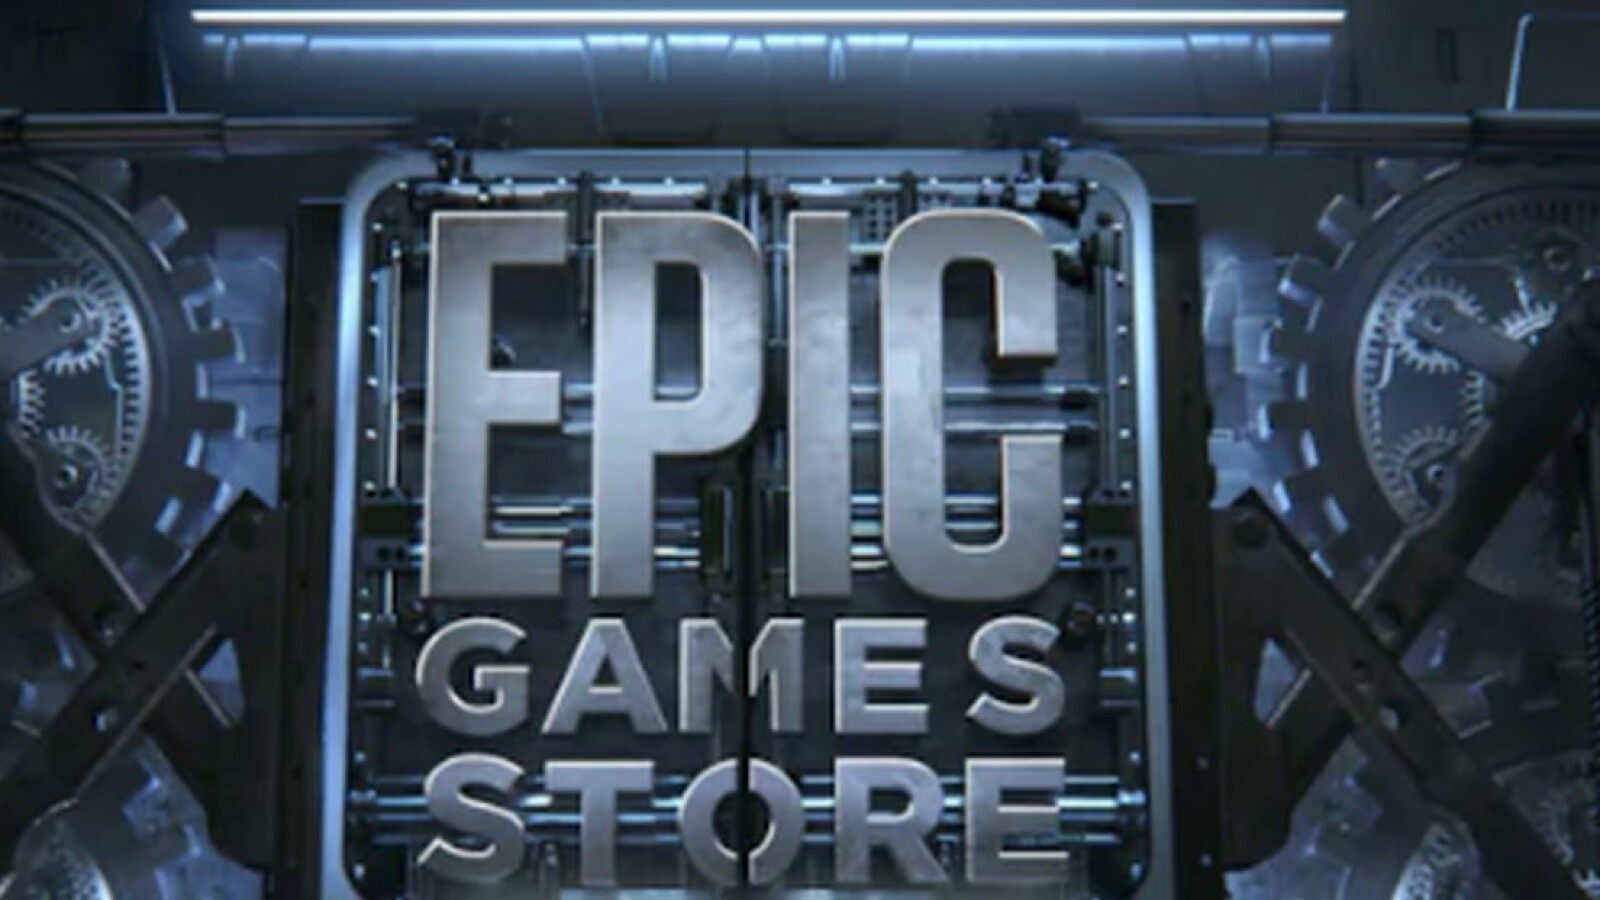 epic games store drm